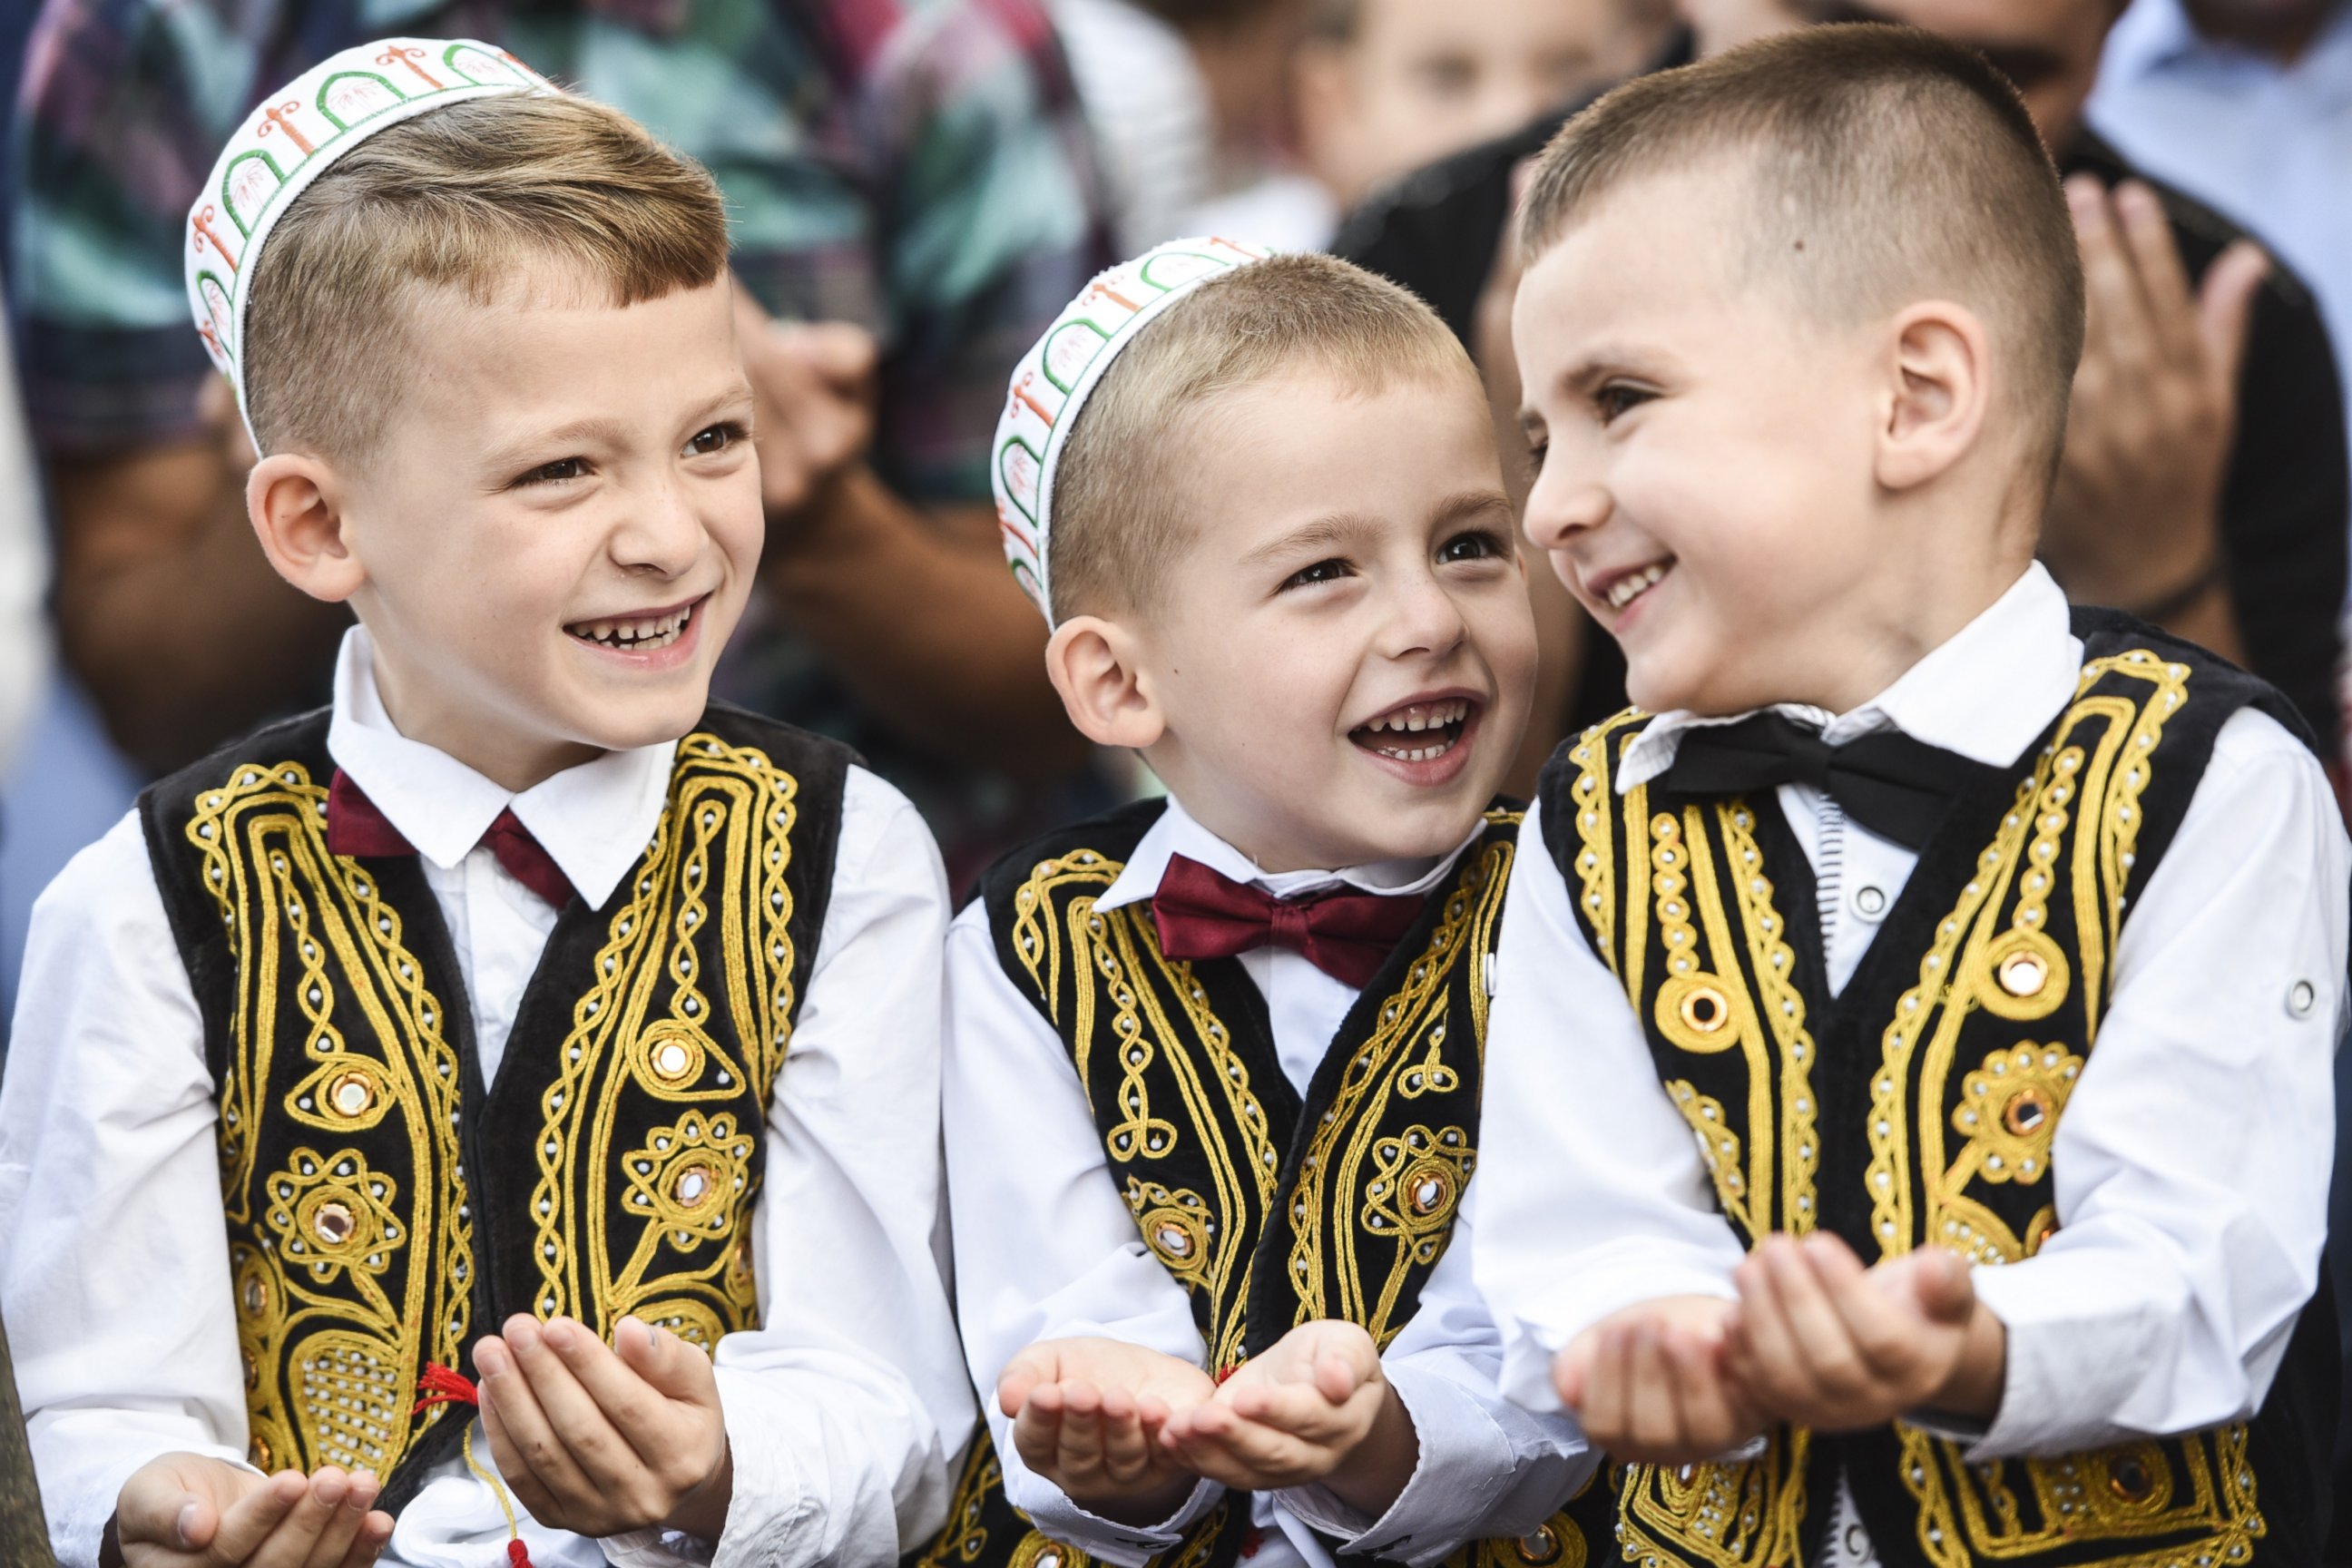 PHOTO: Young Kosovo muslims take part in a prayer during a celebration of Eid al-Fitr marking the end of the fasting month of Ramadan at the Sulltan Mehmet Fatih mosque in Pristina on July 17, 2015. 